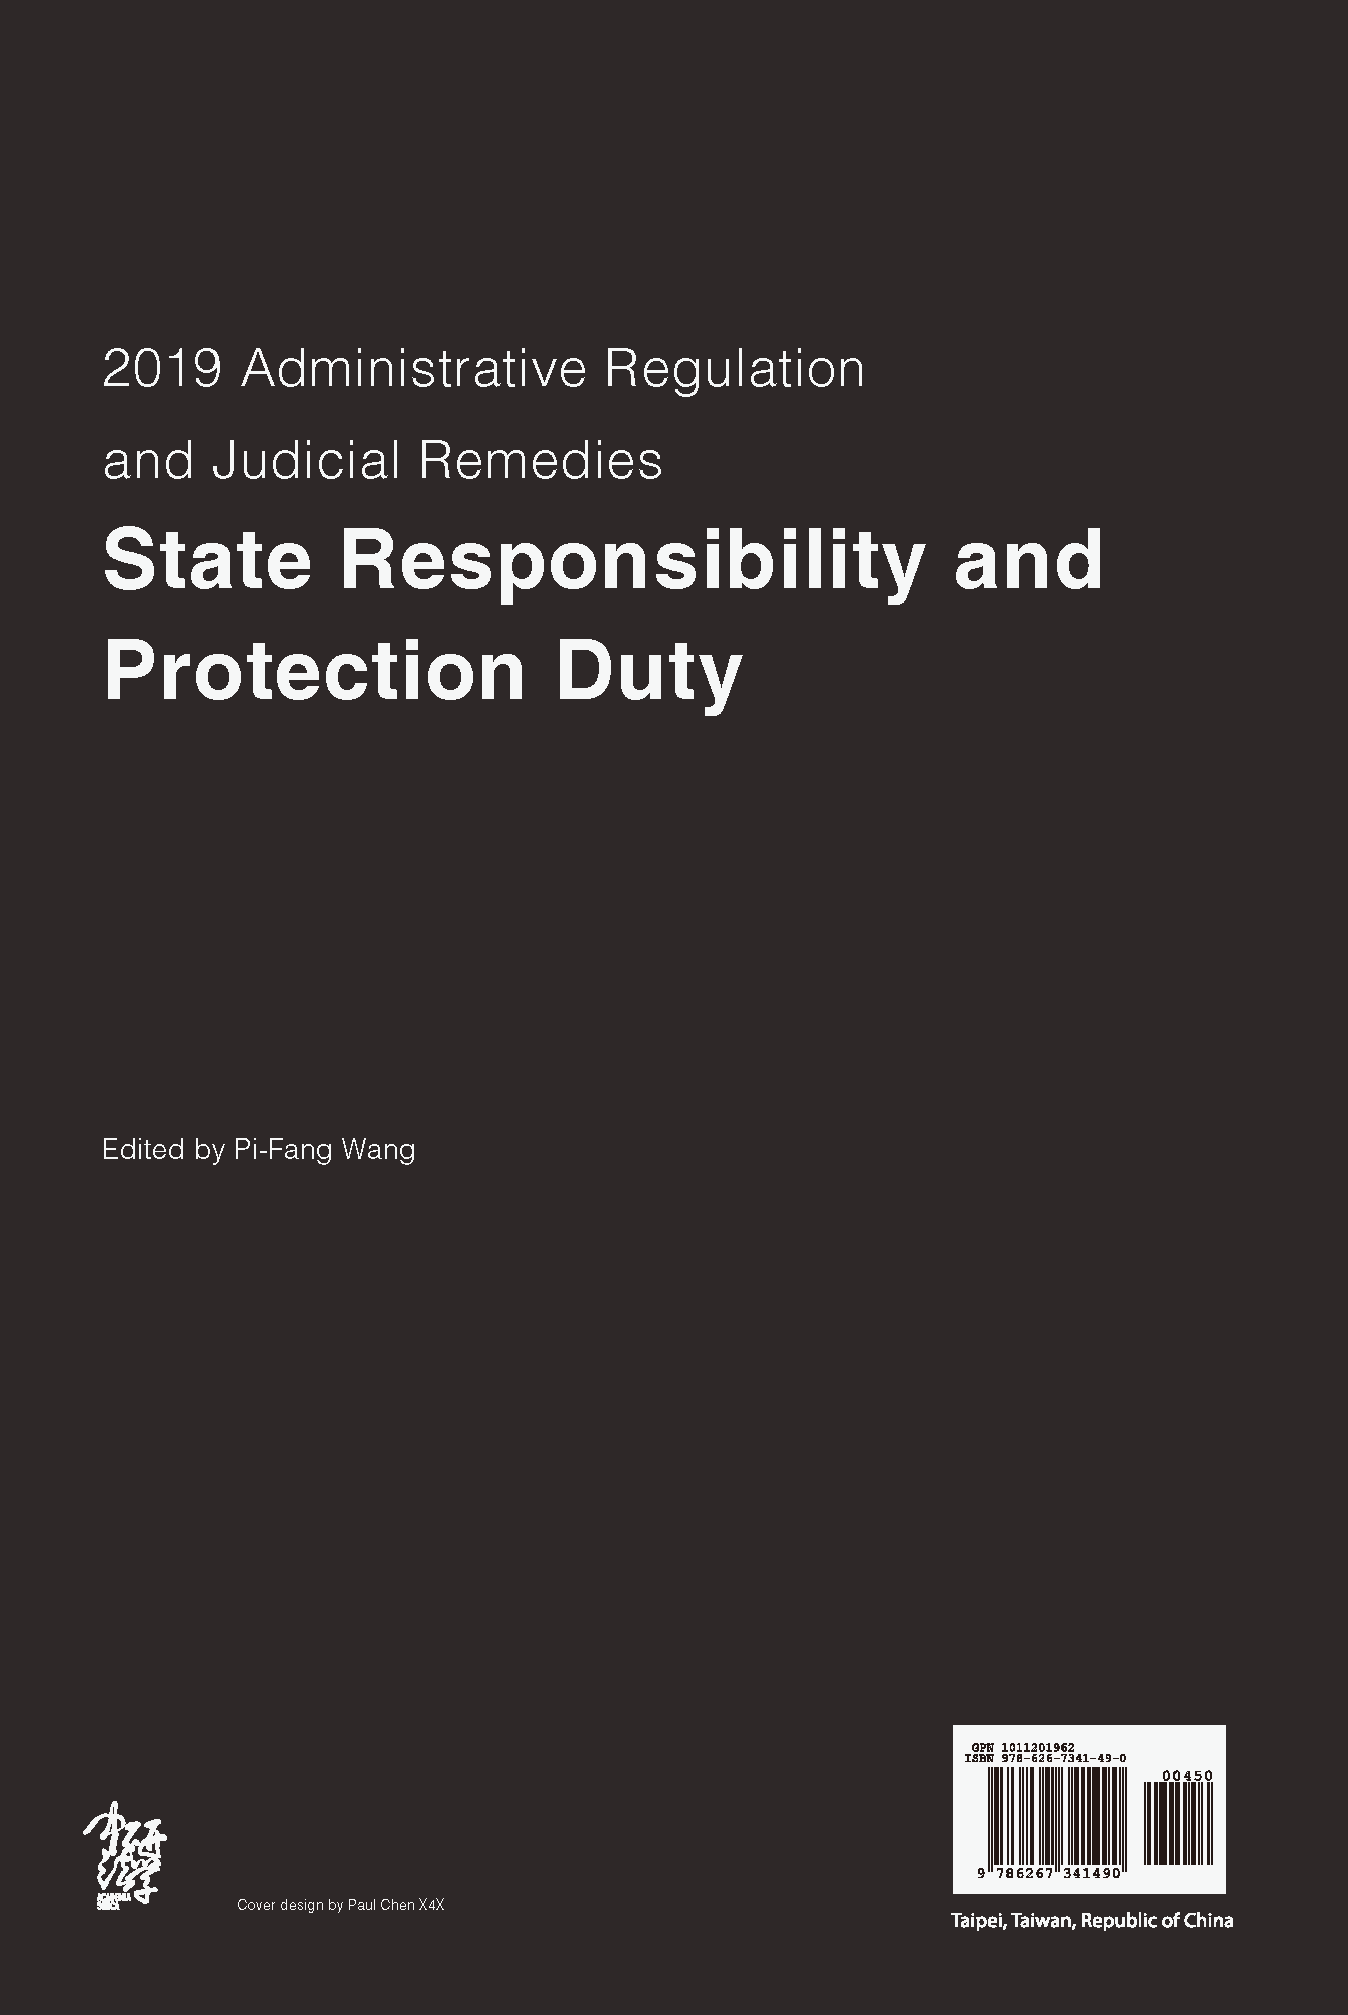 2019 Administrative Regulation and Judicial Remedies: State Responsibility and Protection Duty